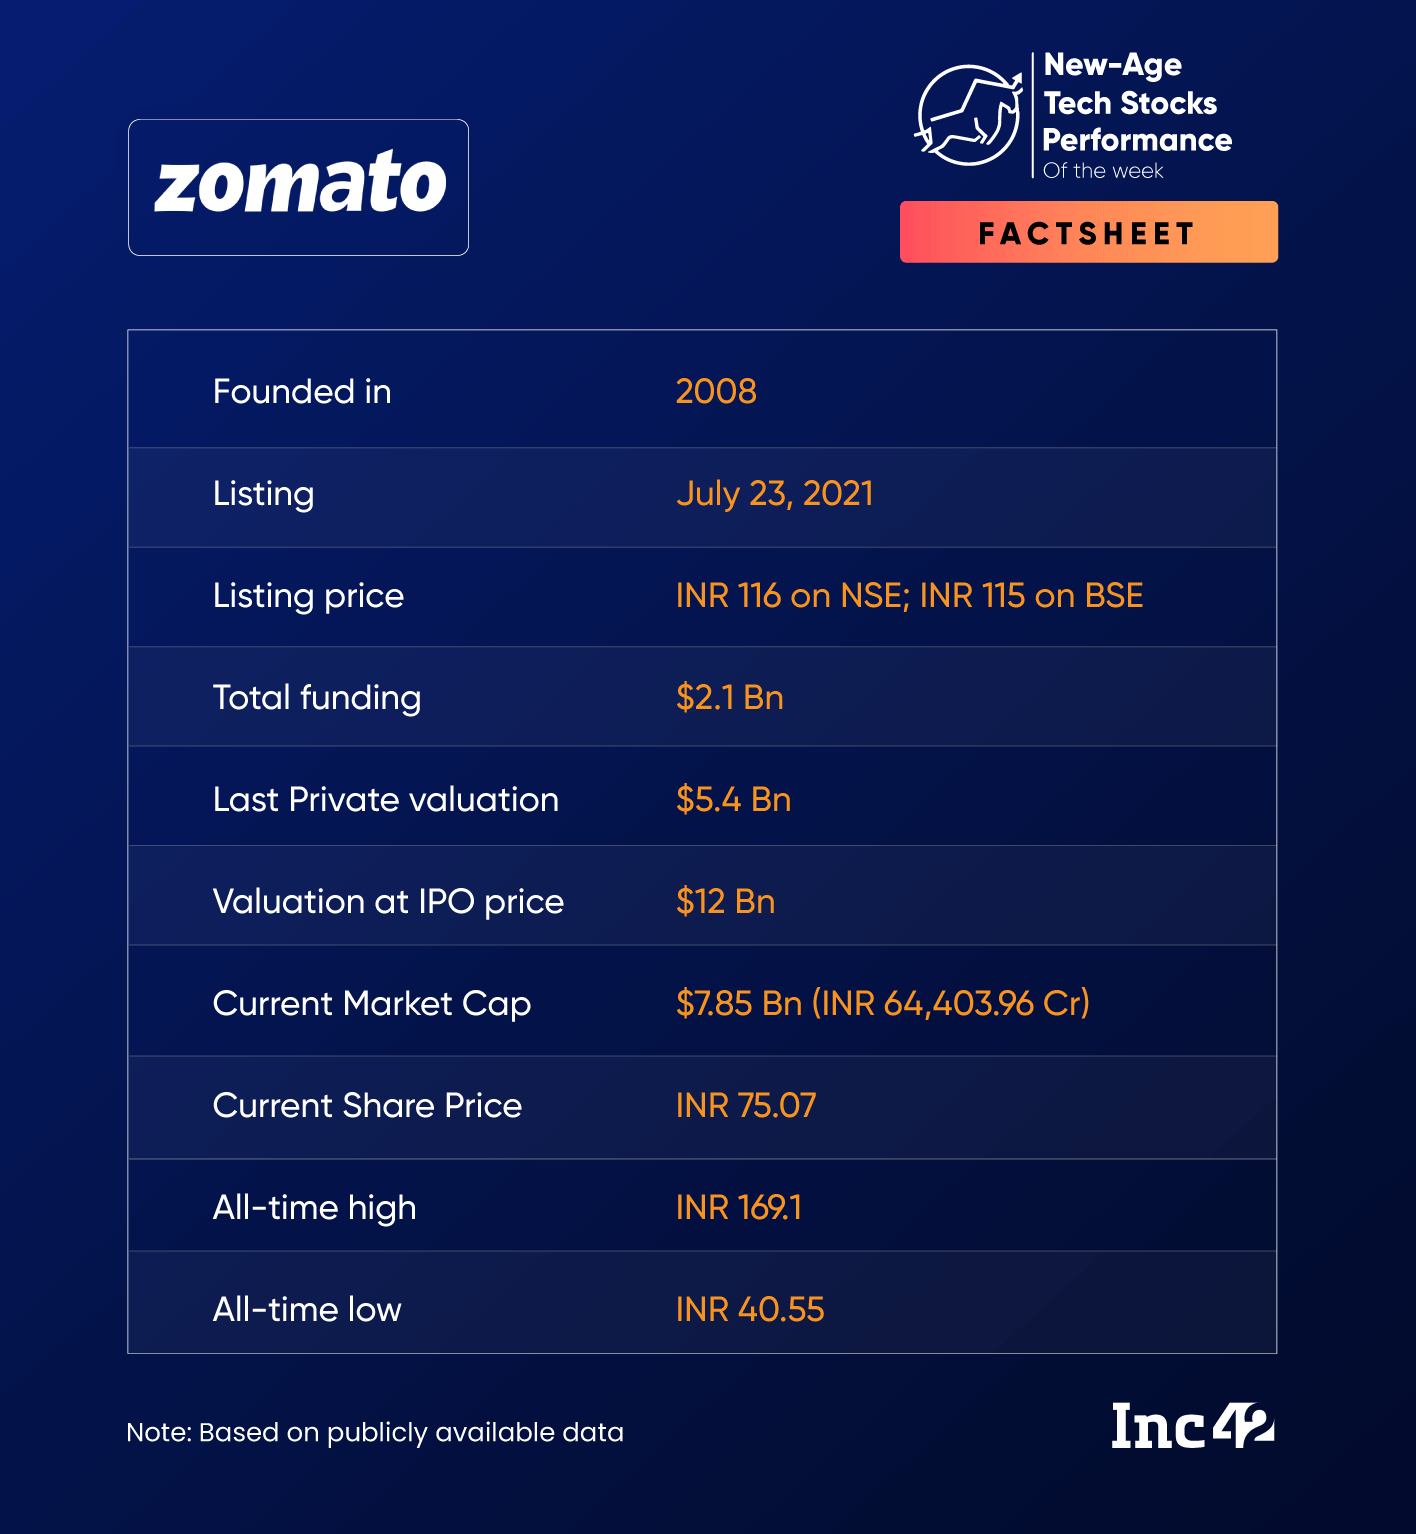 Zomato’s New Features